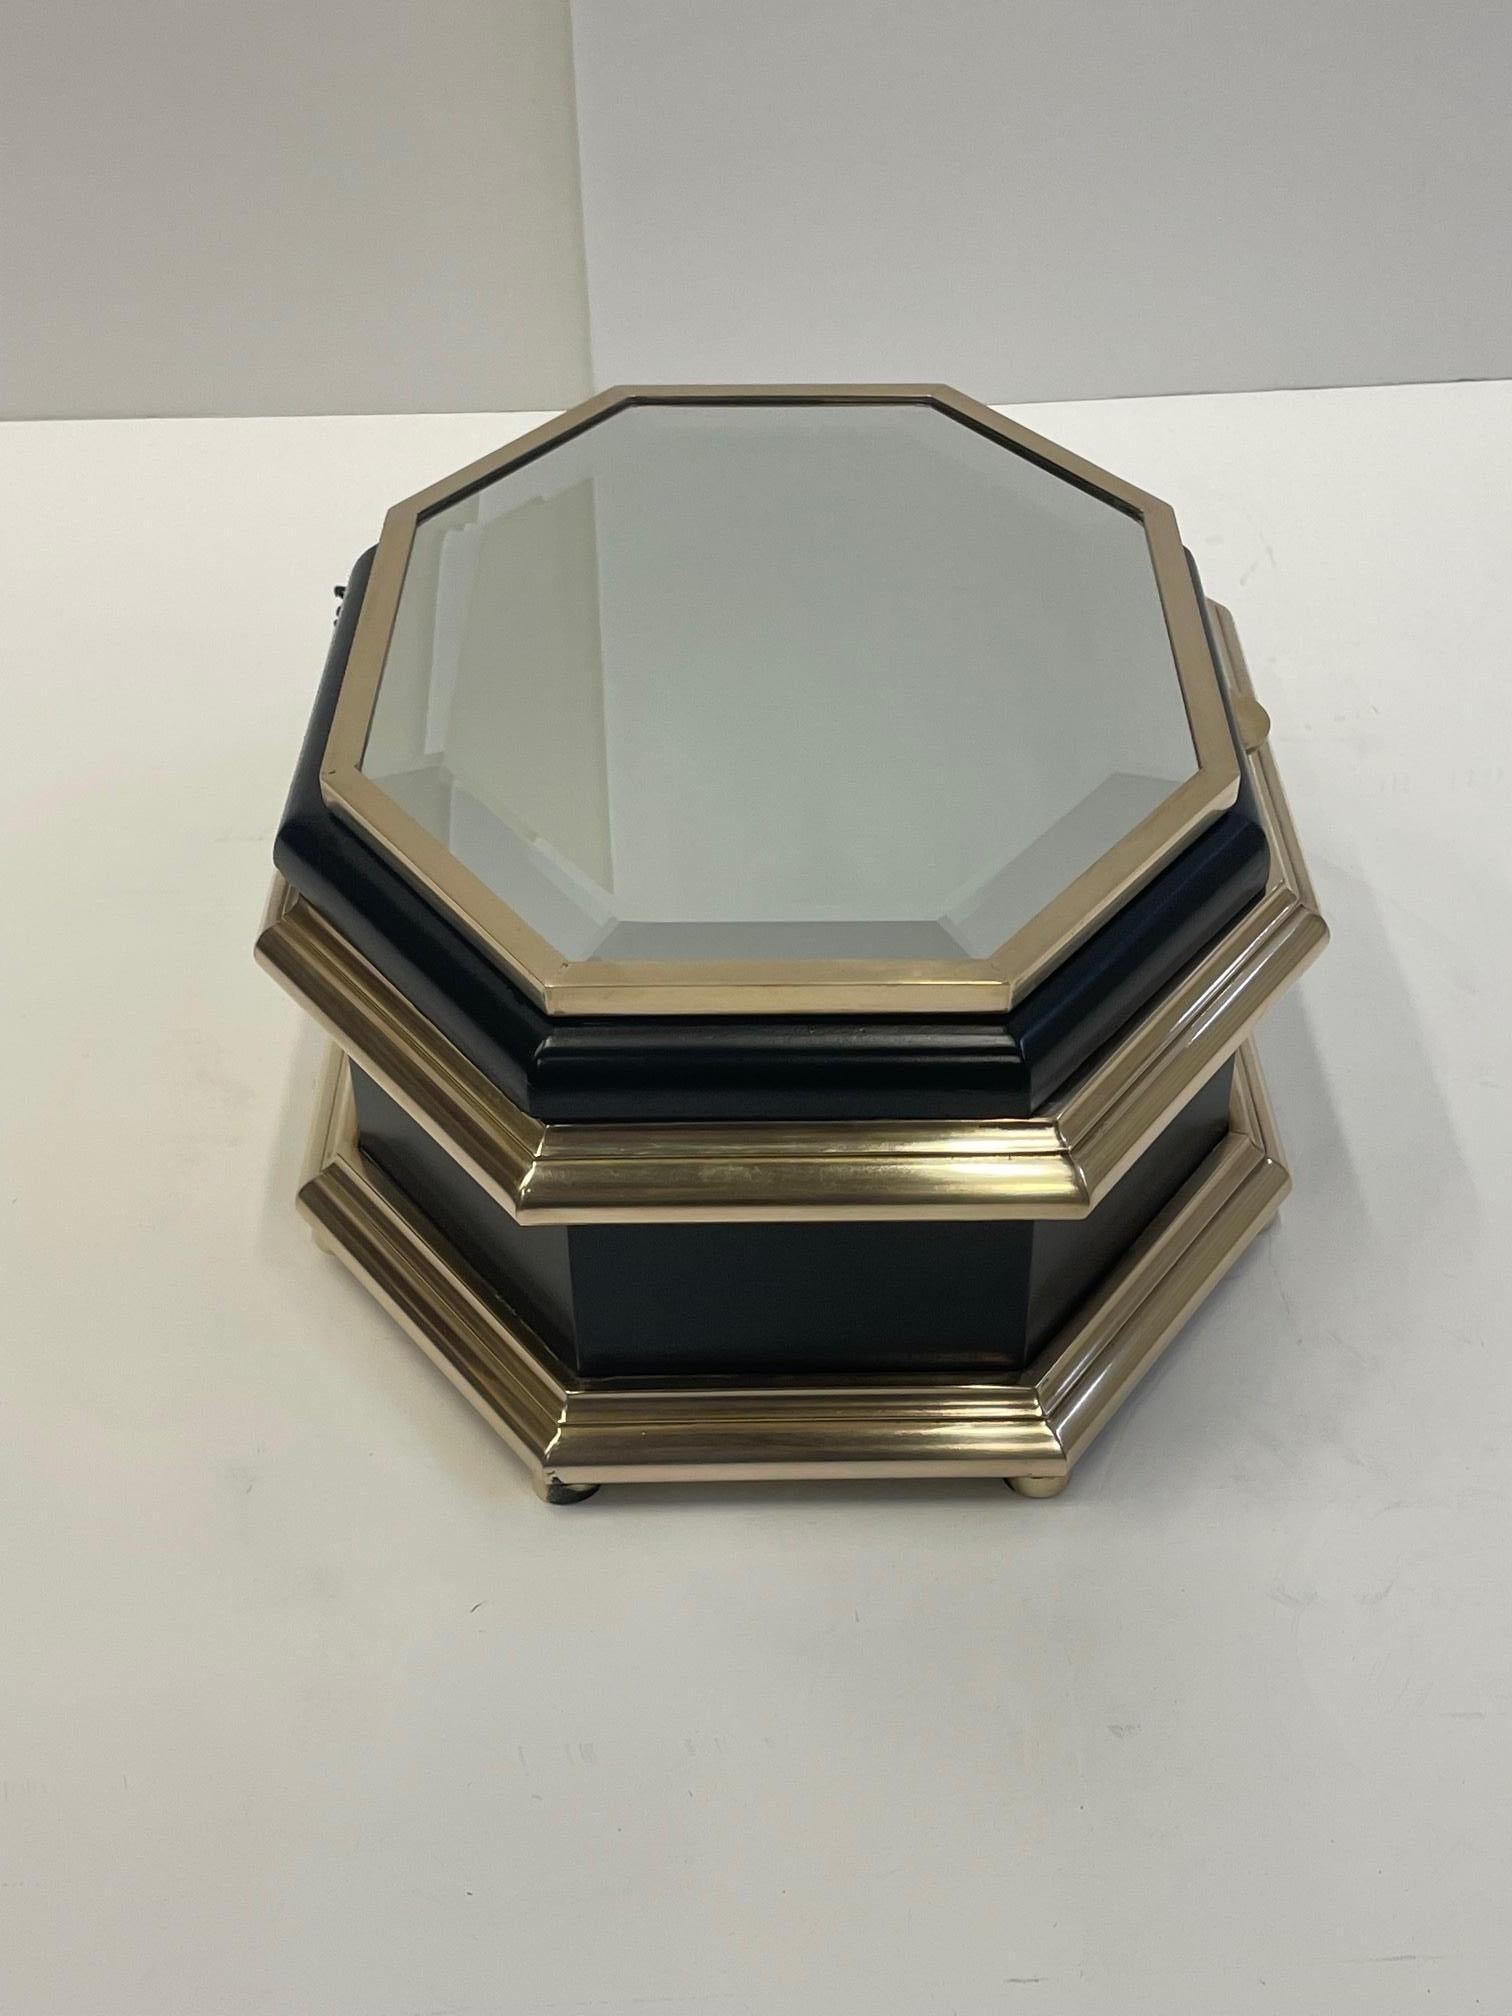 Sumptuous large black enamel box by Chapman having a marvelous interesting 8 sided oblong shape, mirrored top, brass decoration and plush velvet interior.